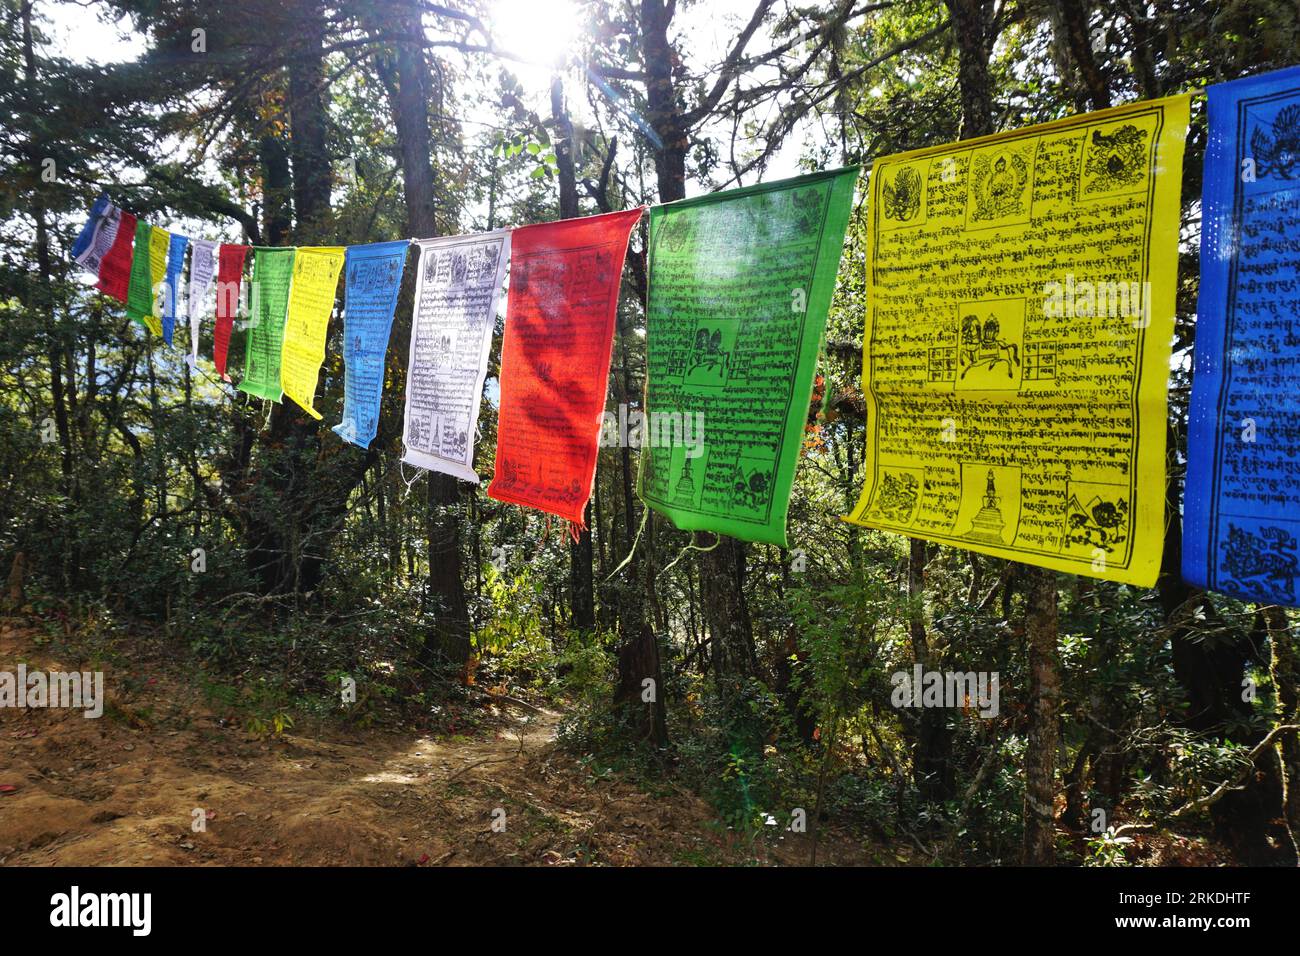 Colorful string of printed cloth prayer flags hanging in the trees along the forest trail to the Tiger's Nest Monastery (Taktsang) in Paro, Bhutan Stock Photo